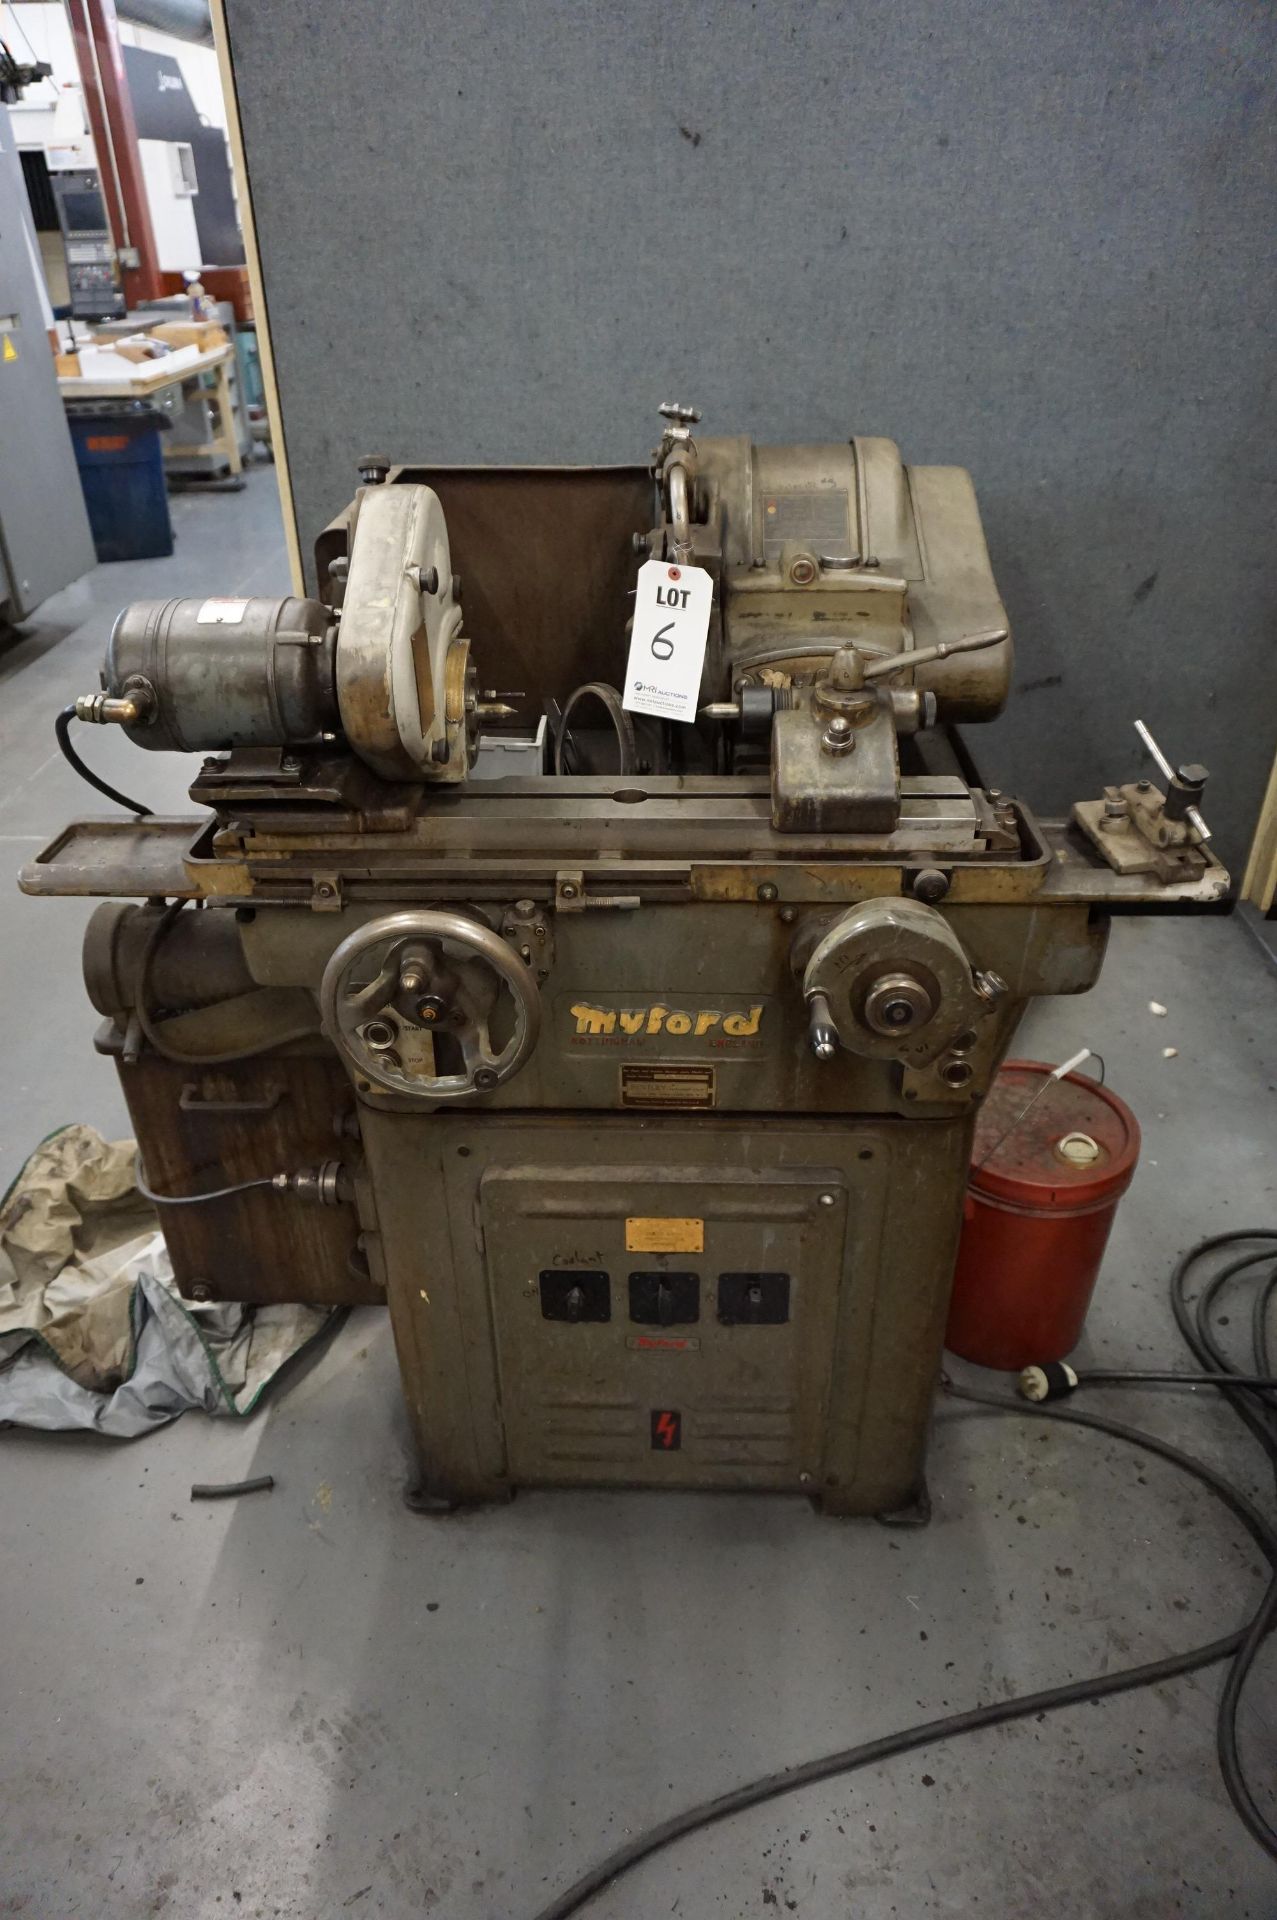 MYFORD MG12 OD CYLINDRICAL GRINDER, 12" WHEEL, S/N S45865, WITH ROLLING SHOP CABINET TO INCLUDE: